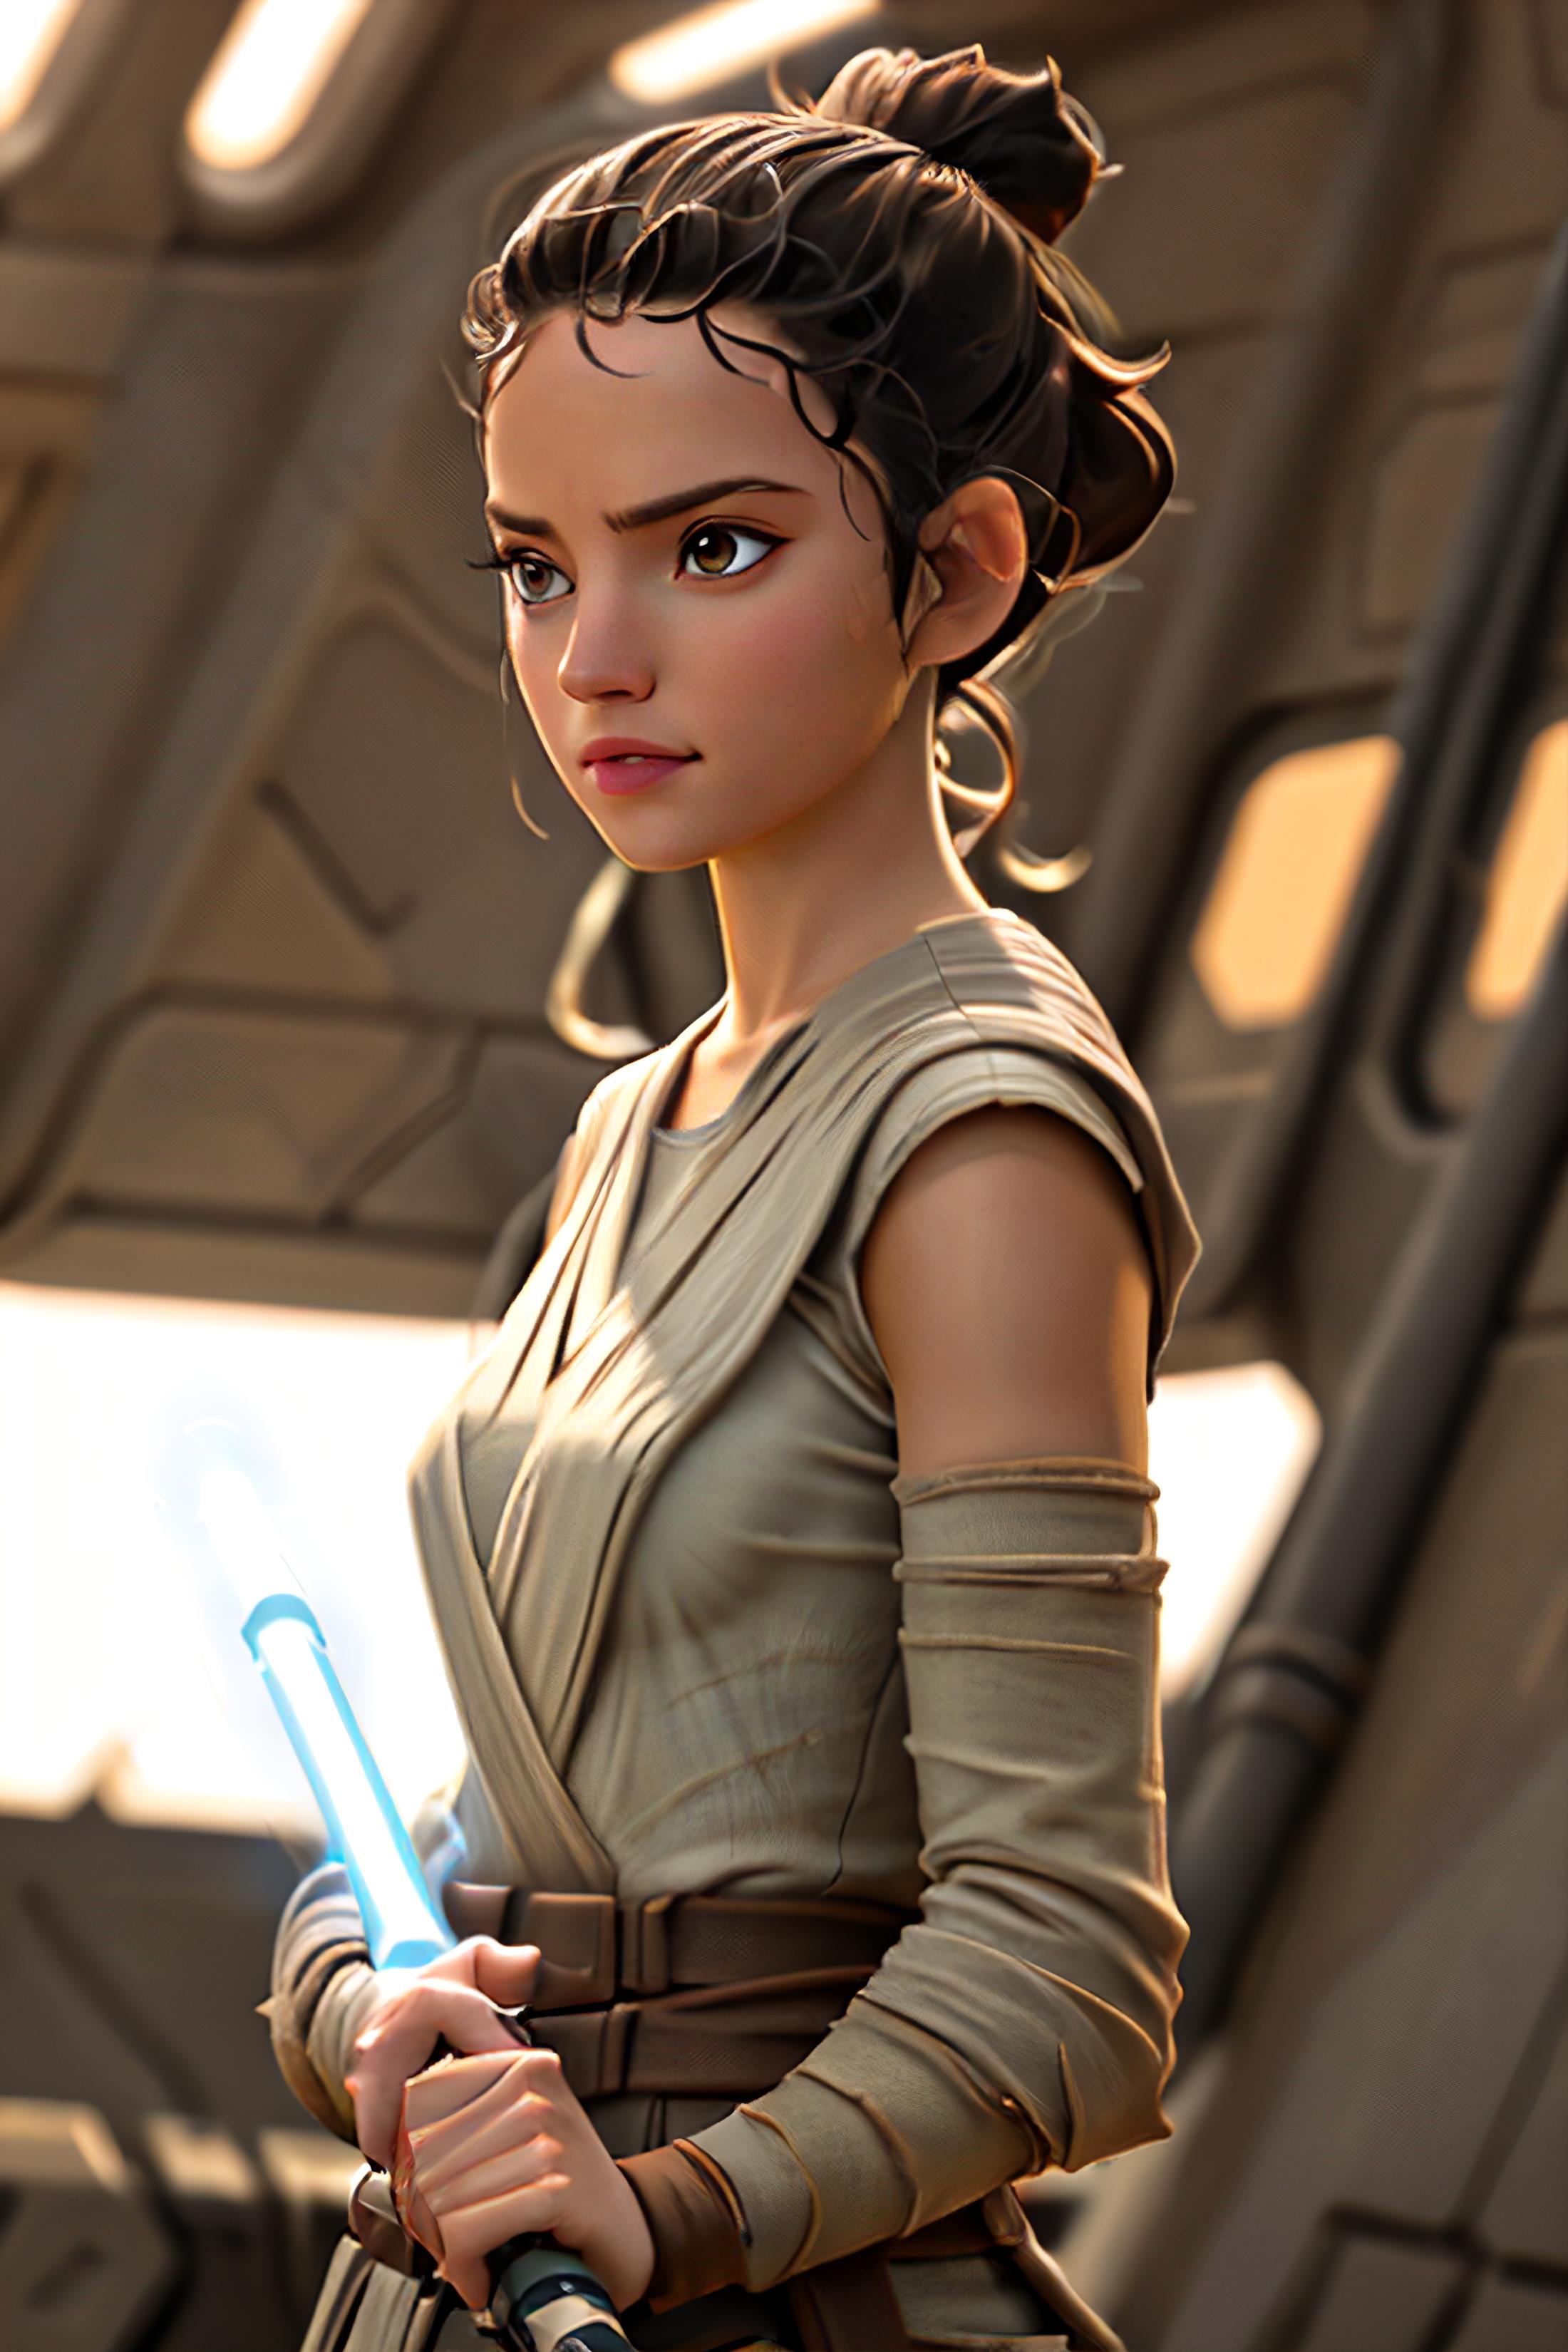 Daisey Ridley / Rey image by __2_